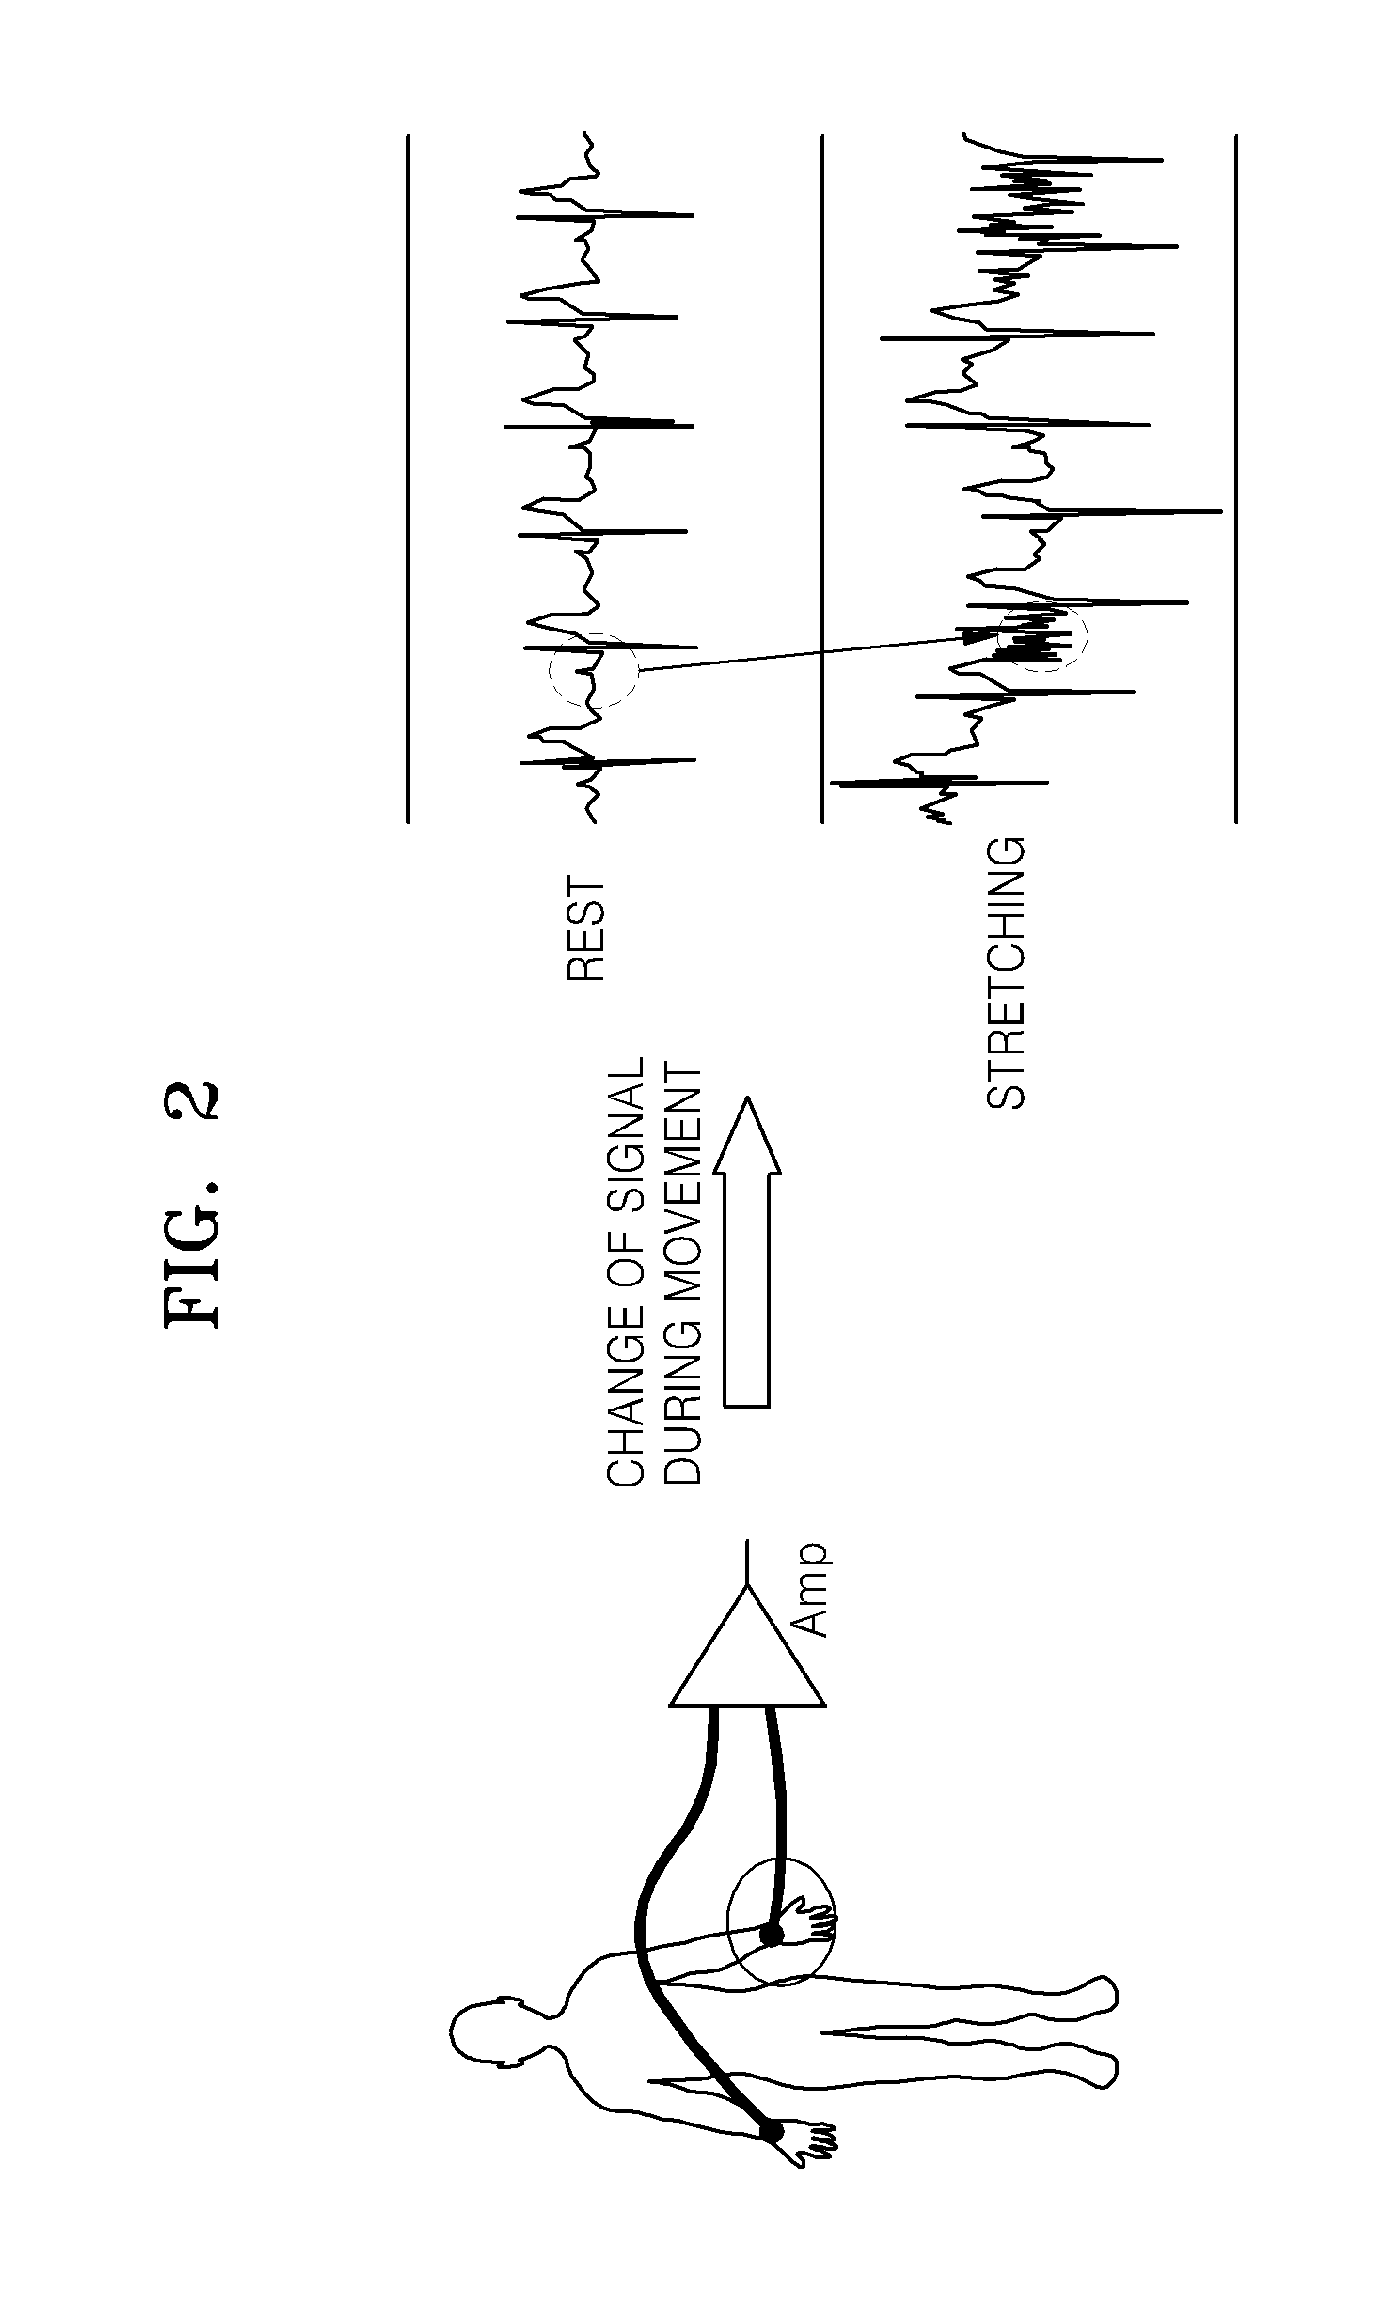 Electrode for measuring bio potential, method of manufacturing the electrode, and system for measuring physiological signal